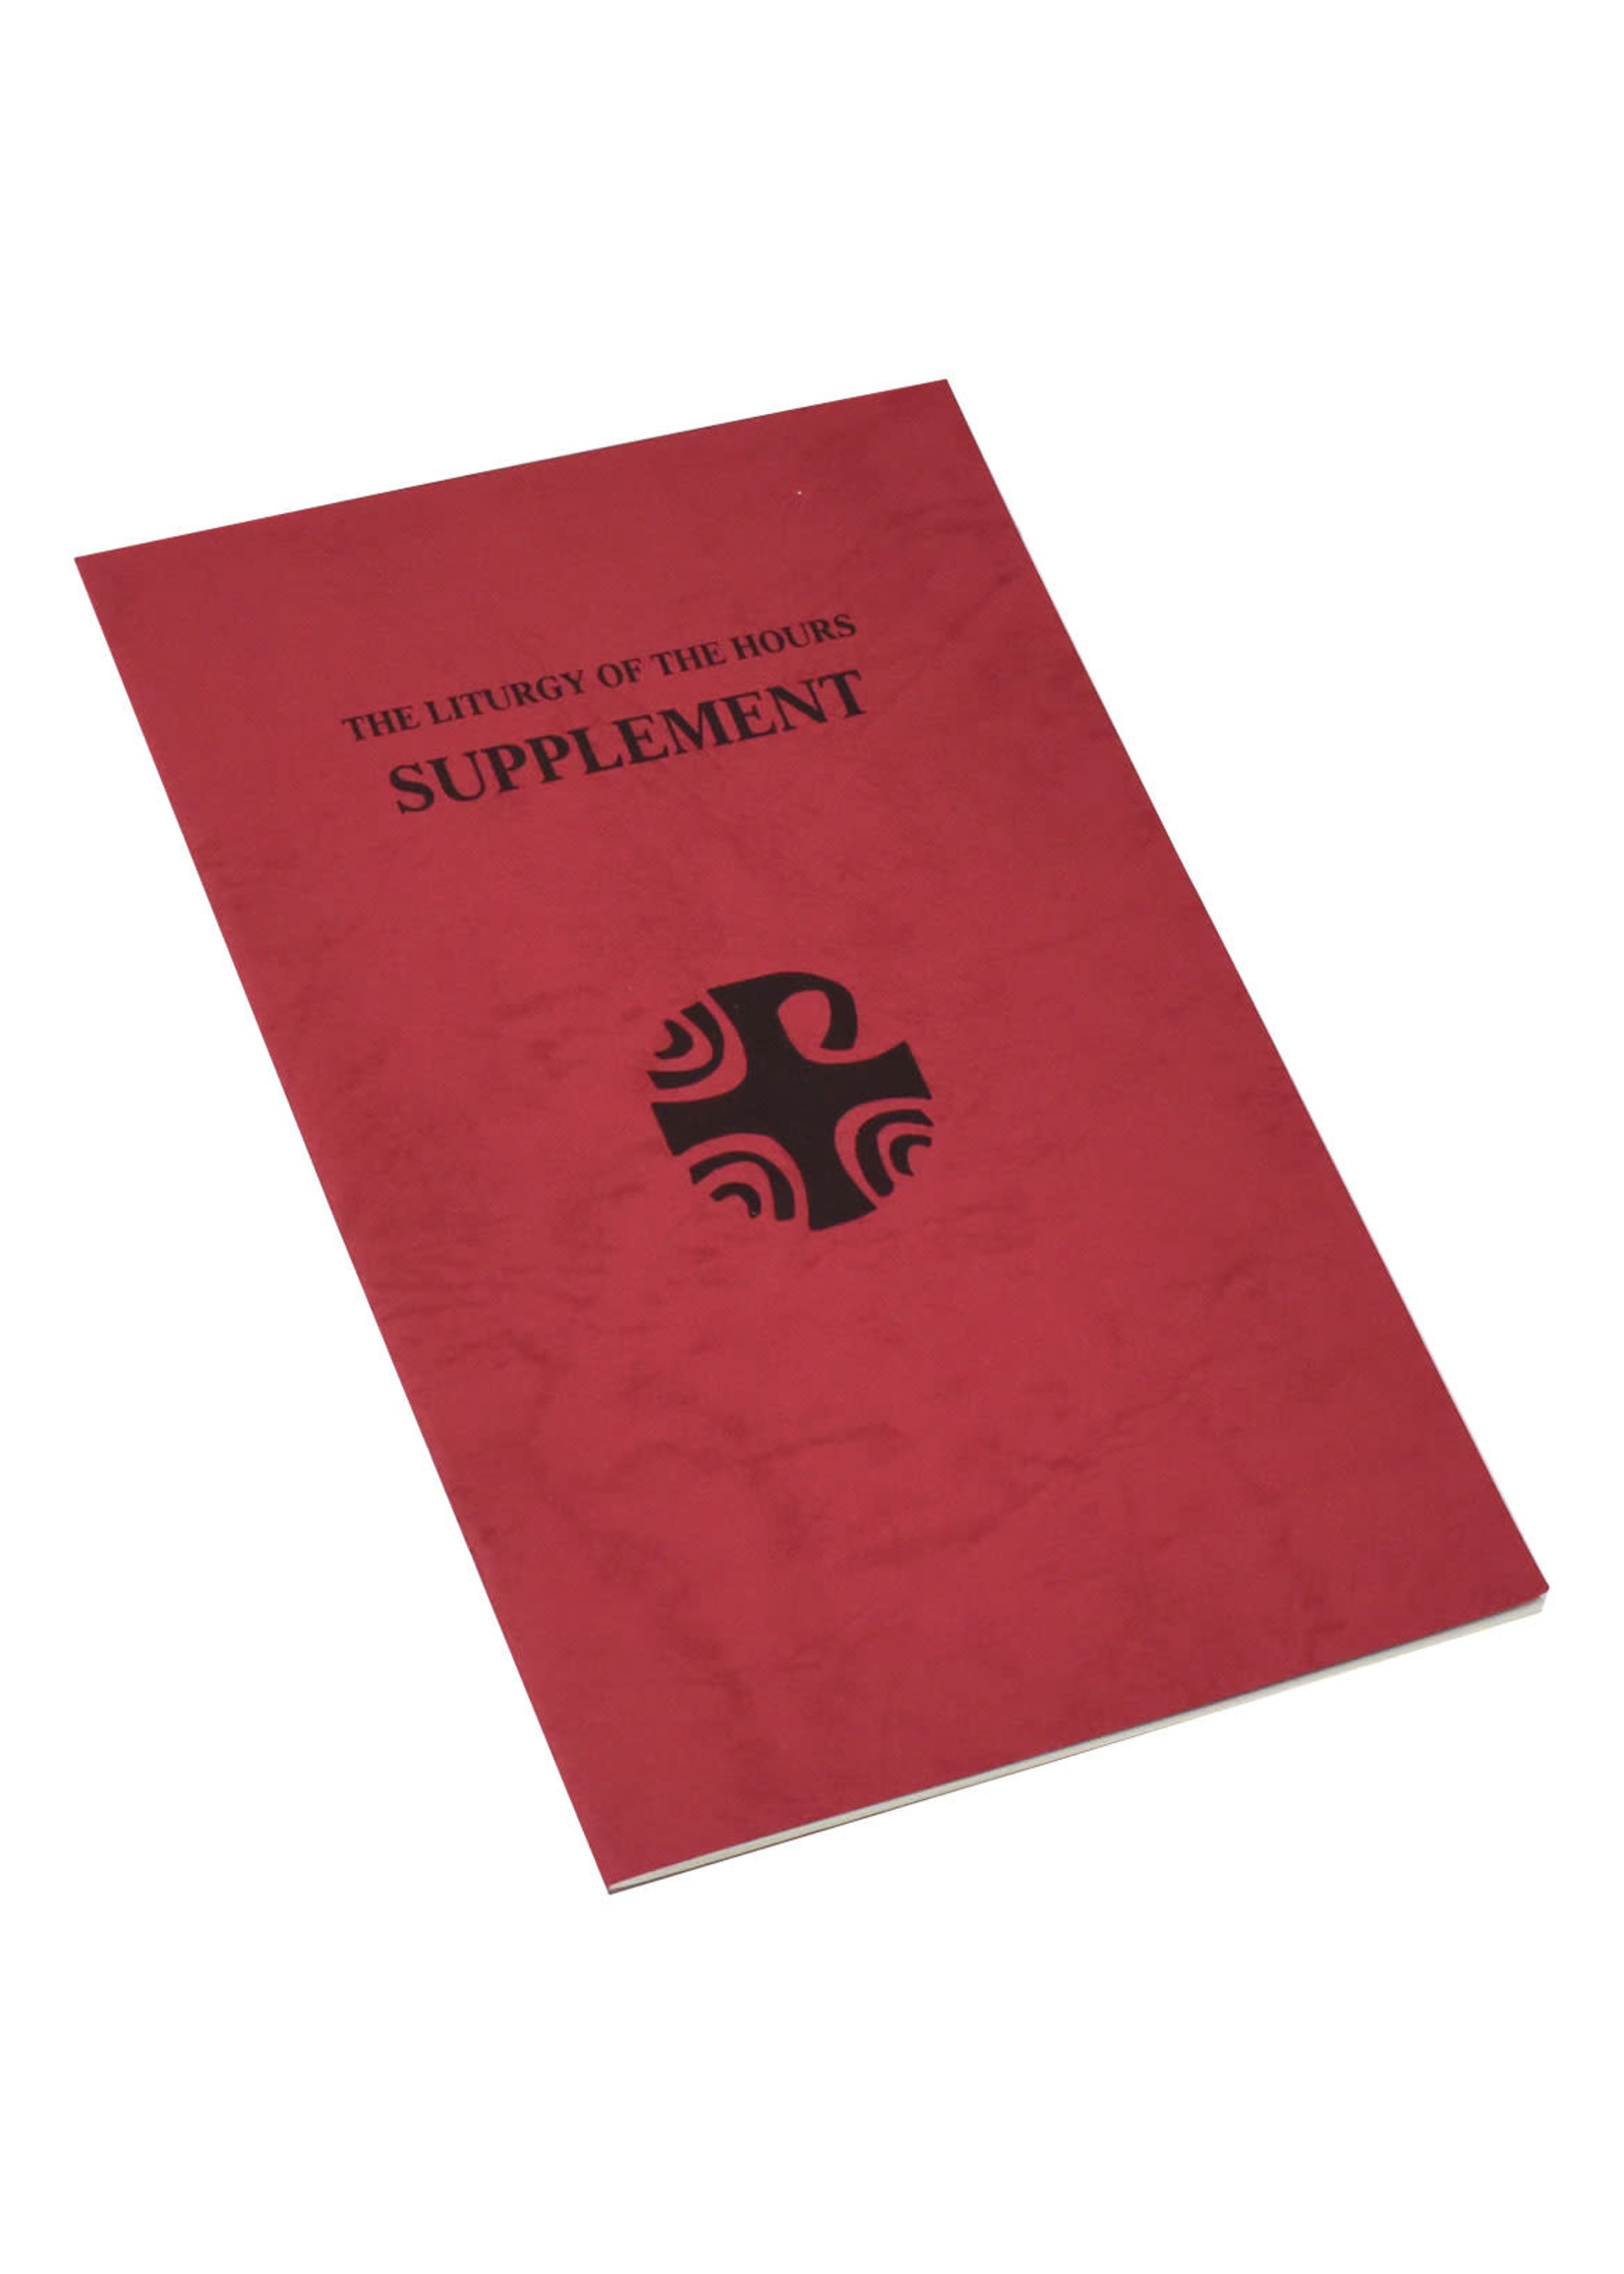 Liturgy of the Hours Supplement